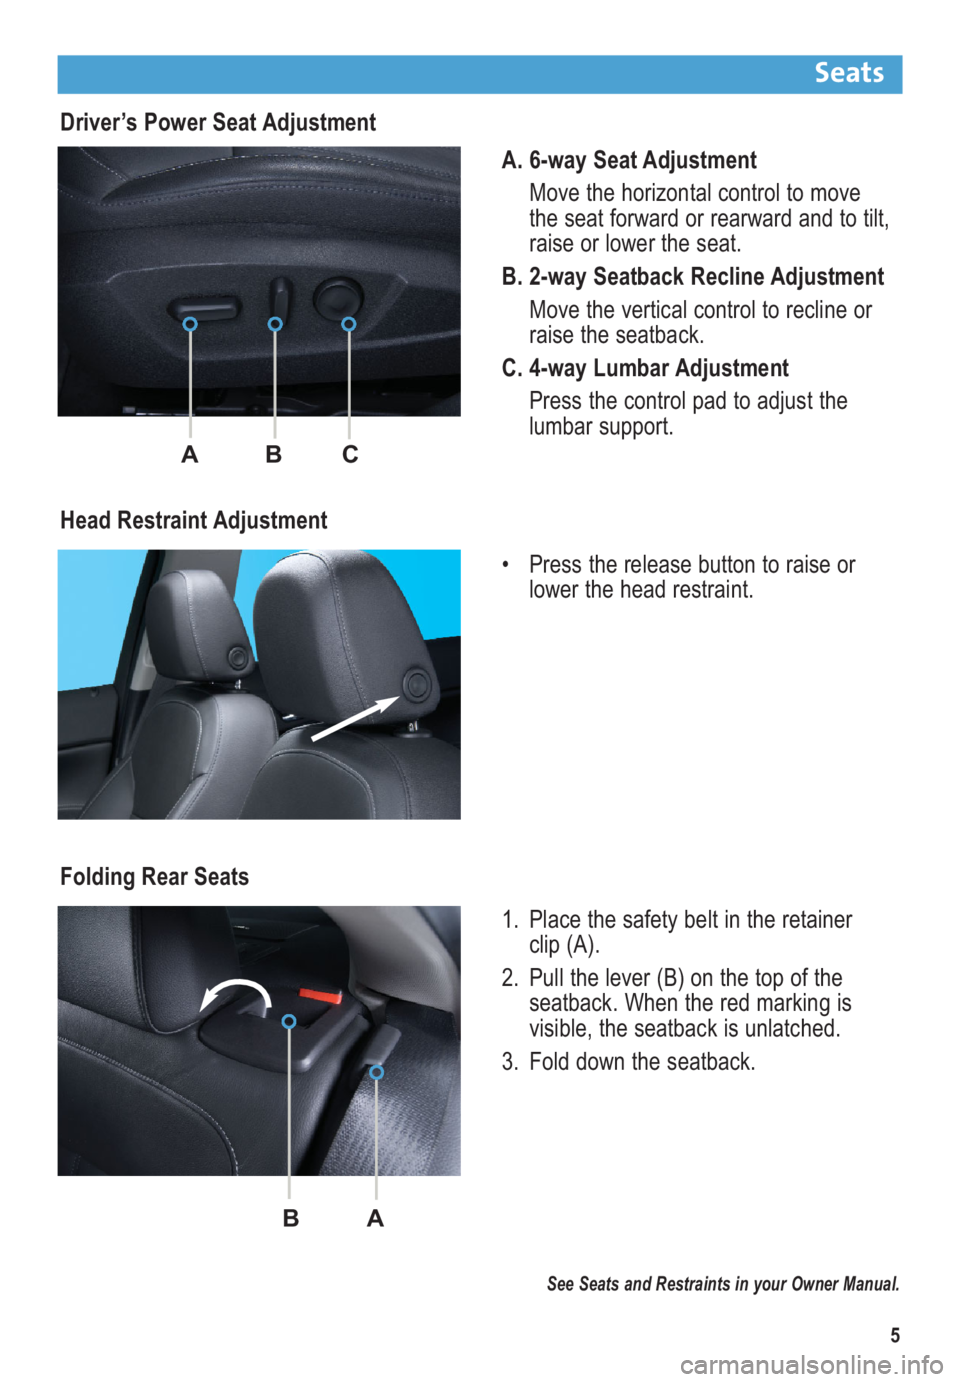 BUICK REGAL 2012  Get To Know Guide 5
Driver’s Power Seat Adjustment
A. 6-way Seat Adjustment
Move the horizontal control to move
the seat forward or rearward and to tilt,
raise or lower the seat.
B. 2-way Seatback Recline Adjustment
